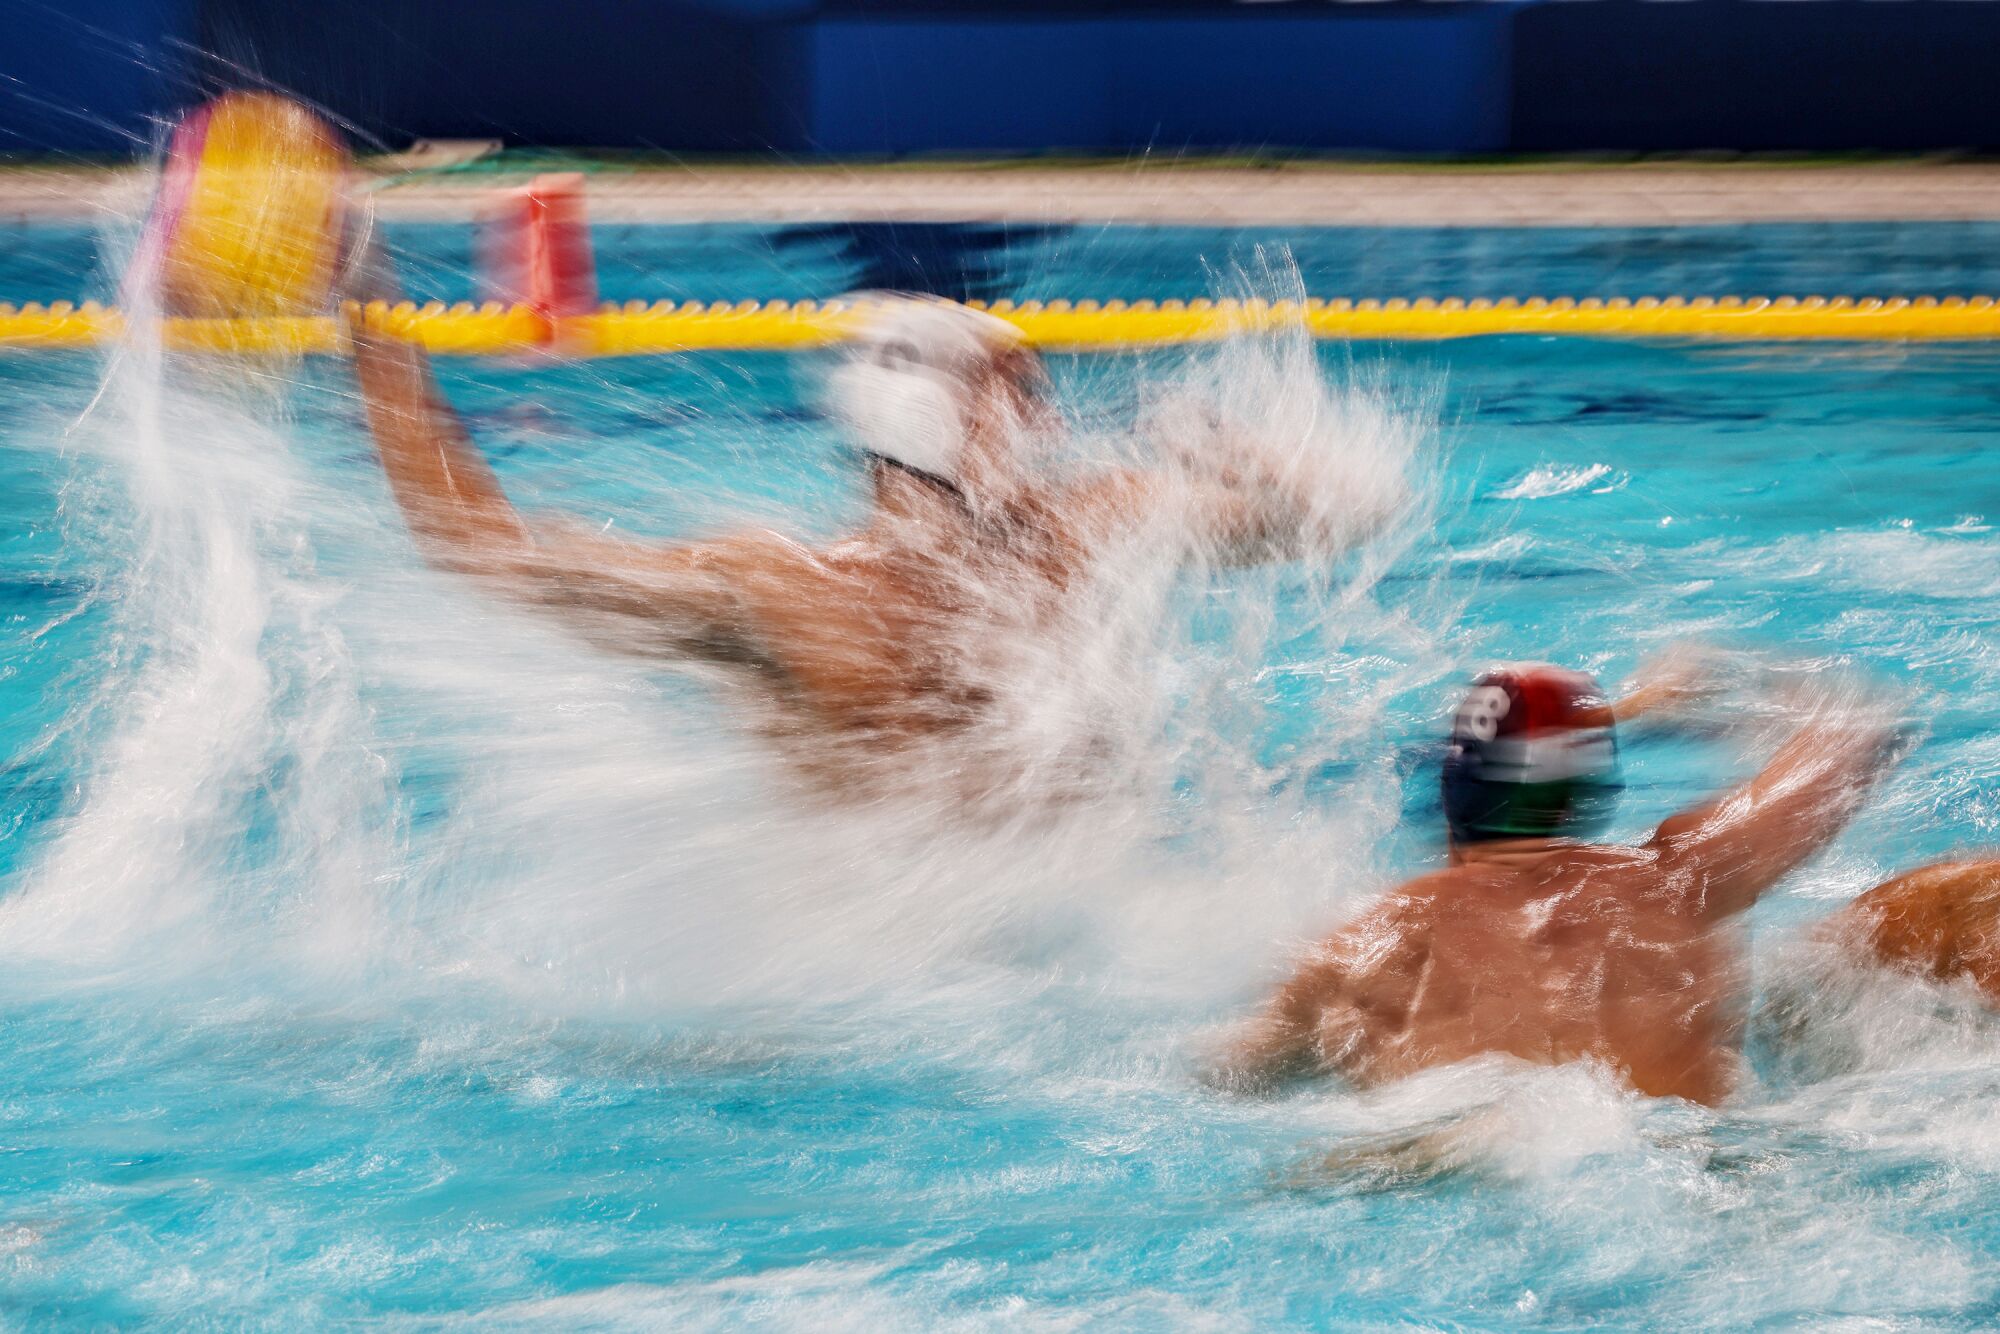 Water polo players compete at the Tokyo Olympics